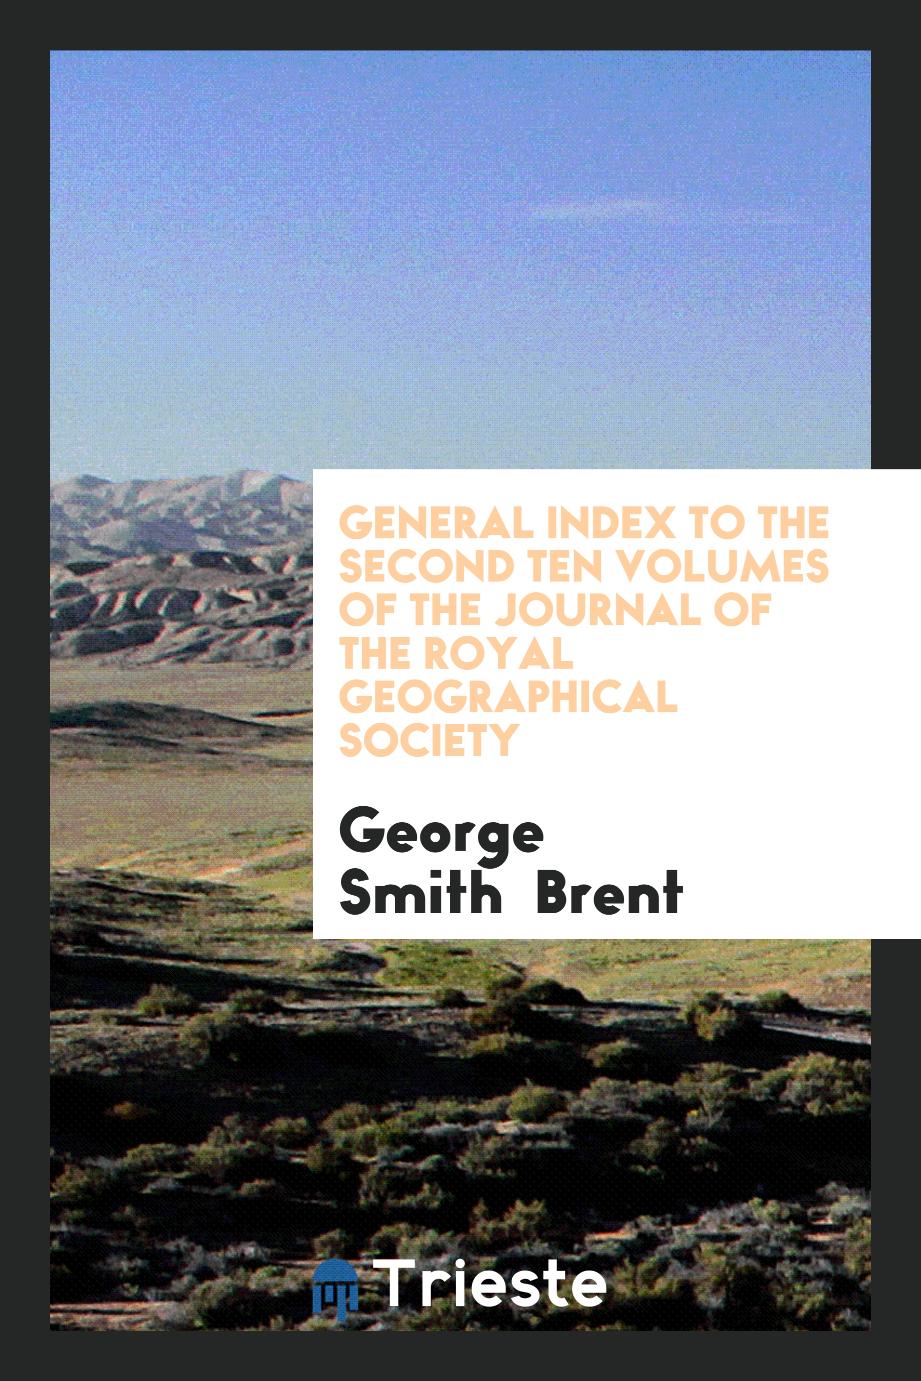 General Index to the Second Ten Volumes of The Journal of the Royal Geographical Society